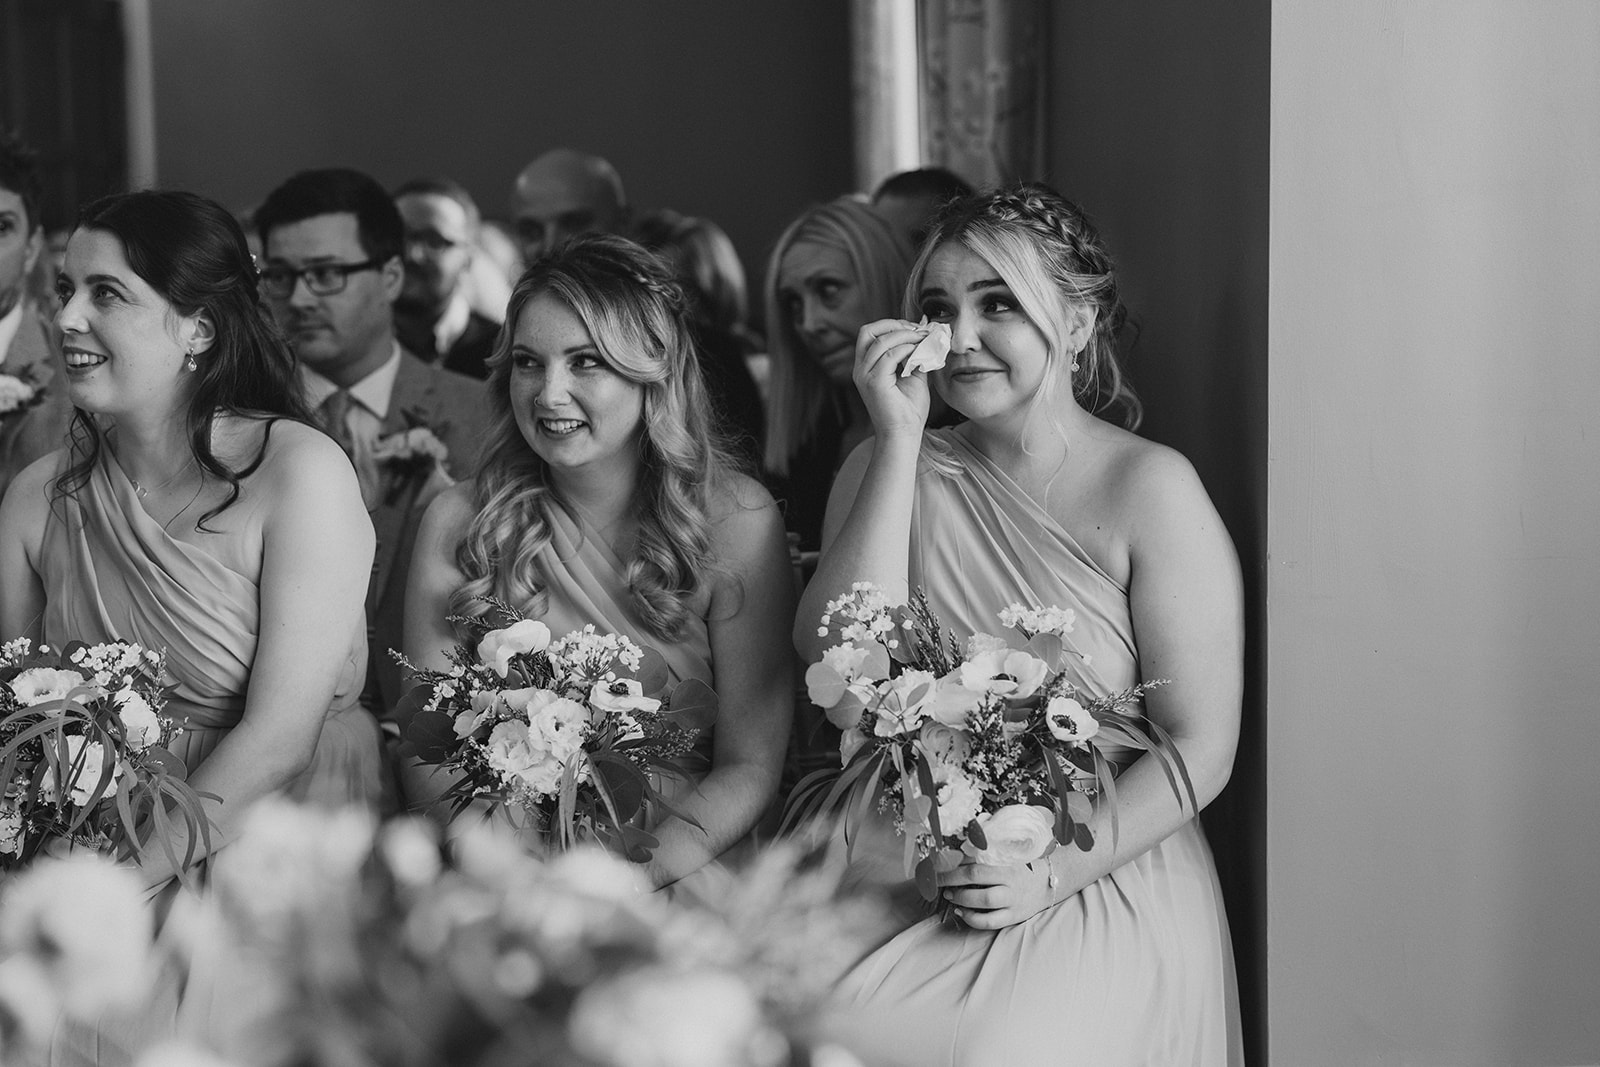 A bridesmaid getting emotional during the wedding ceremony